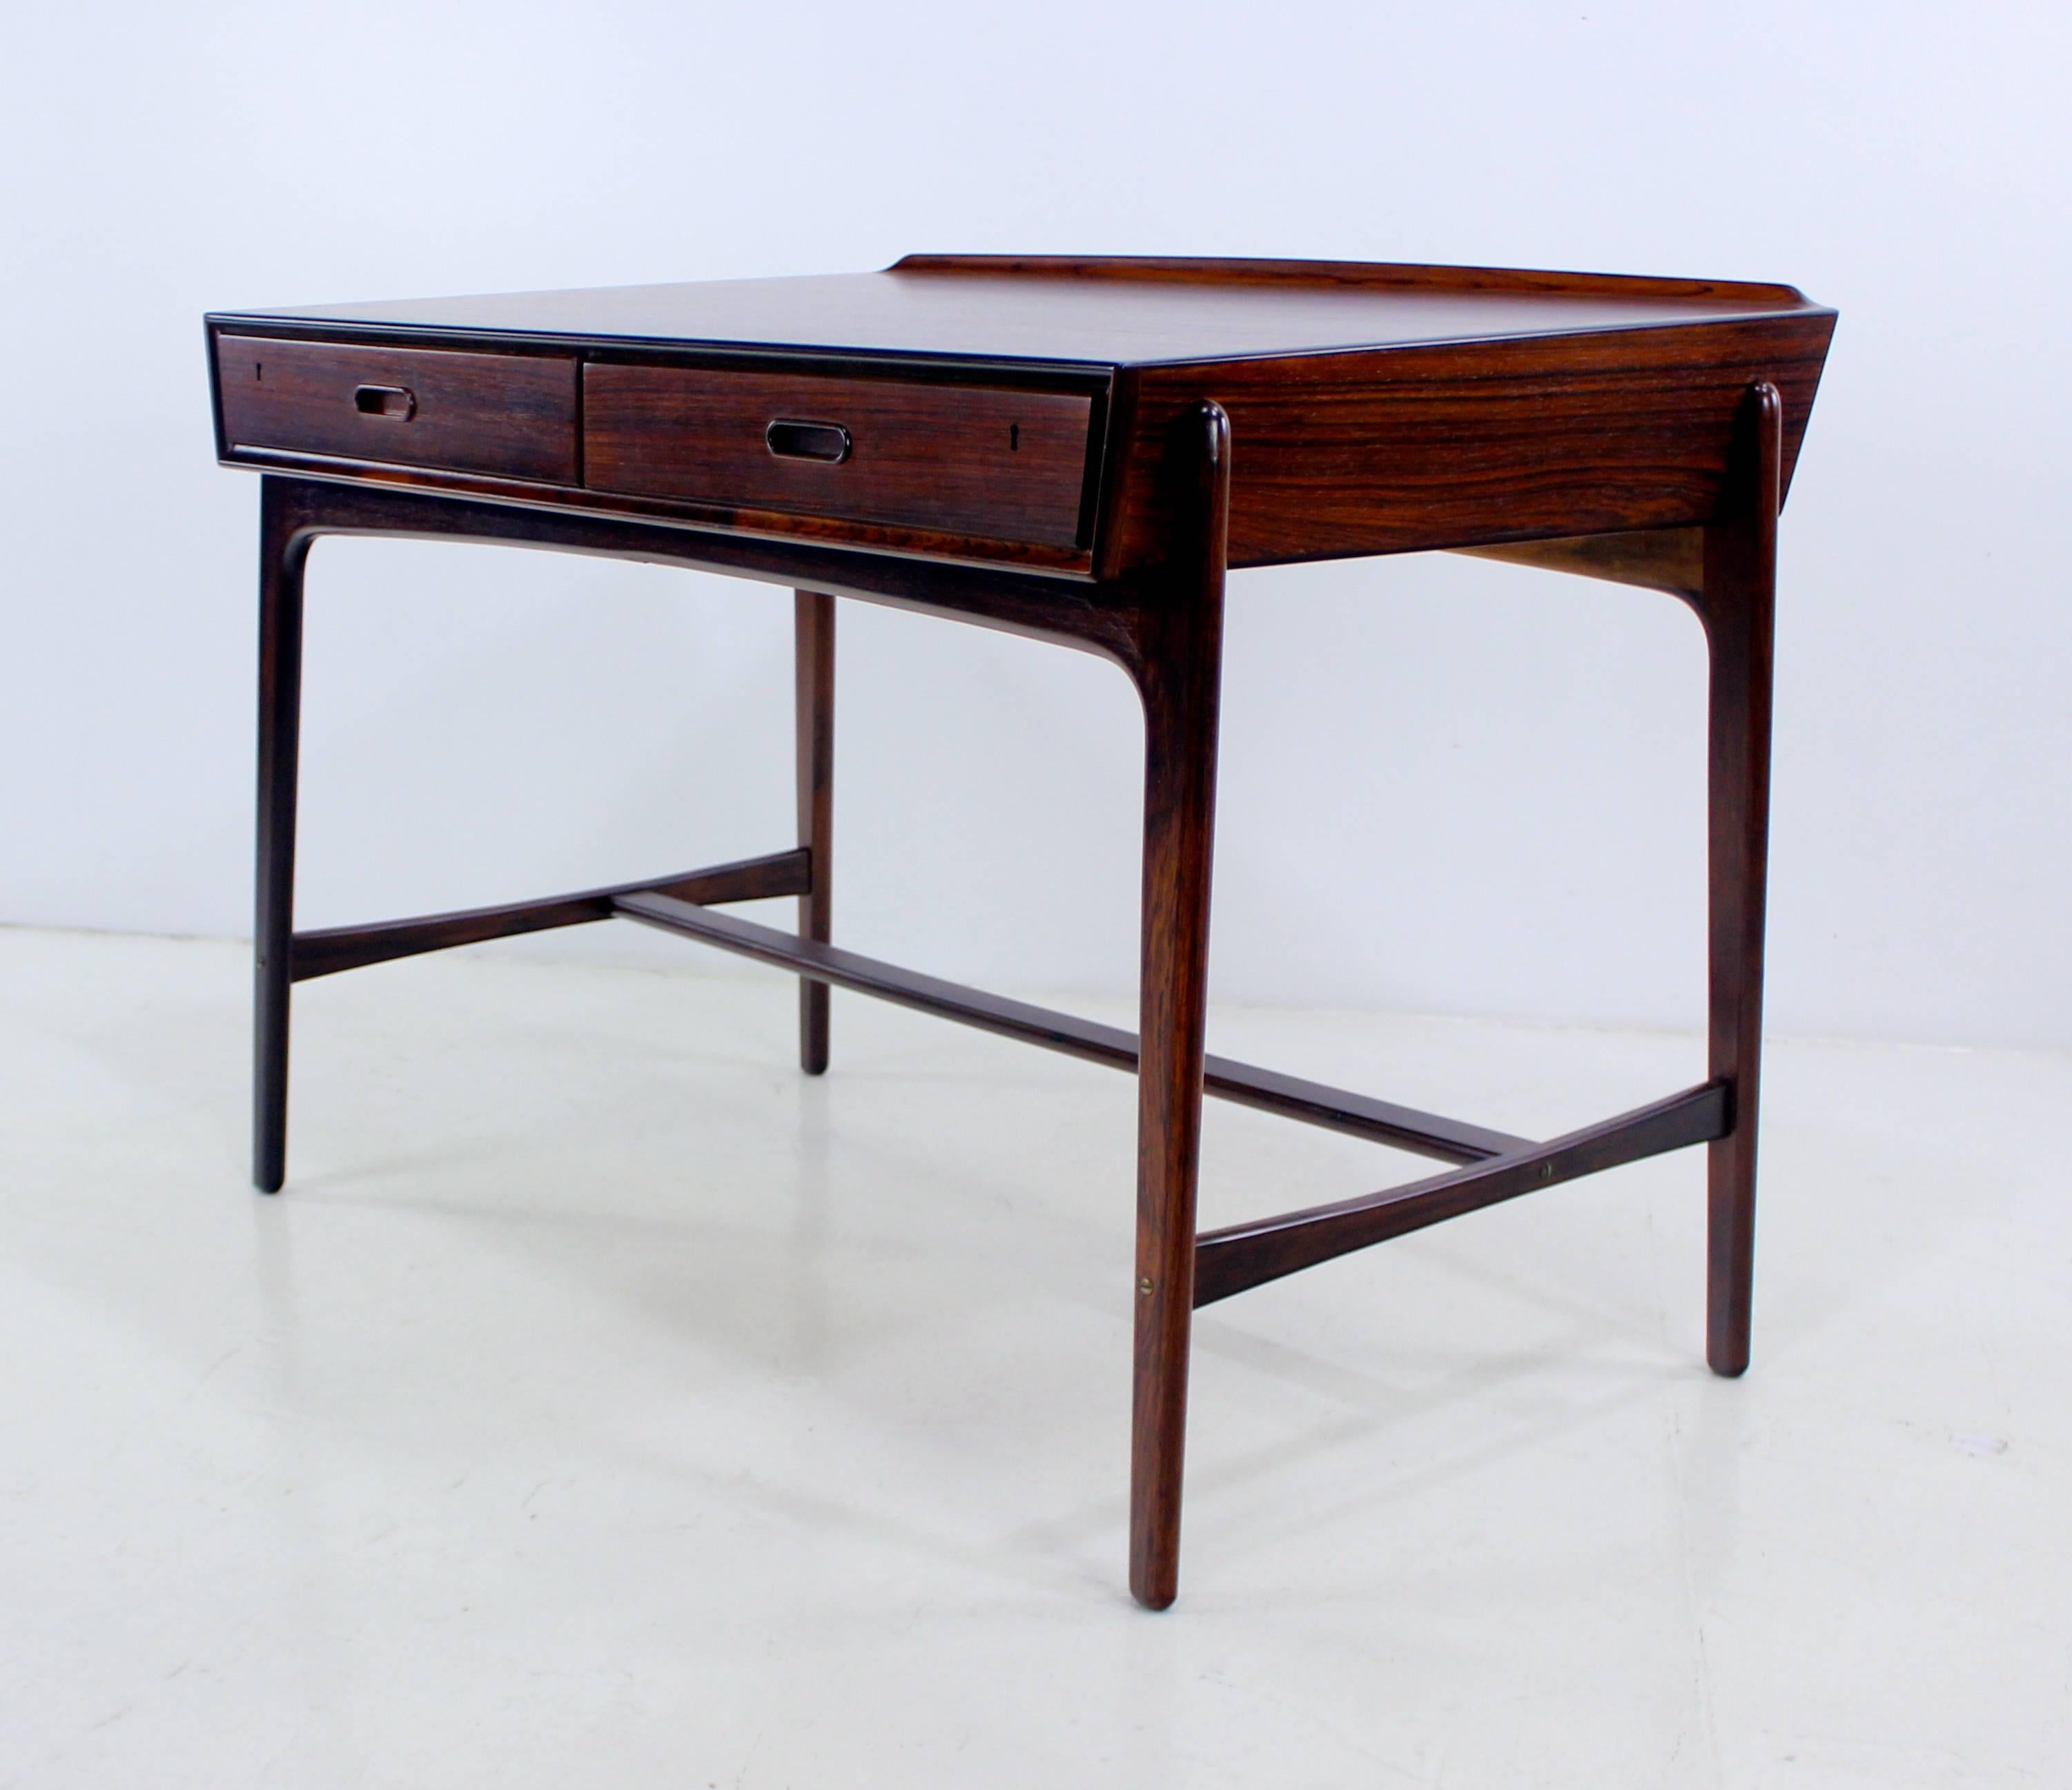 Distinctive Danish modern desk designed by Svend Madsen.
Rare elegance and élan.
Rich rosewood.
Two locking drawers (key included).
Sculptural base and lip on back edge.
Professionally restored and refinished by LookModern.
Matchless quality